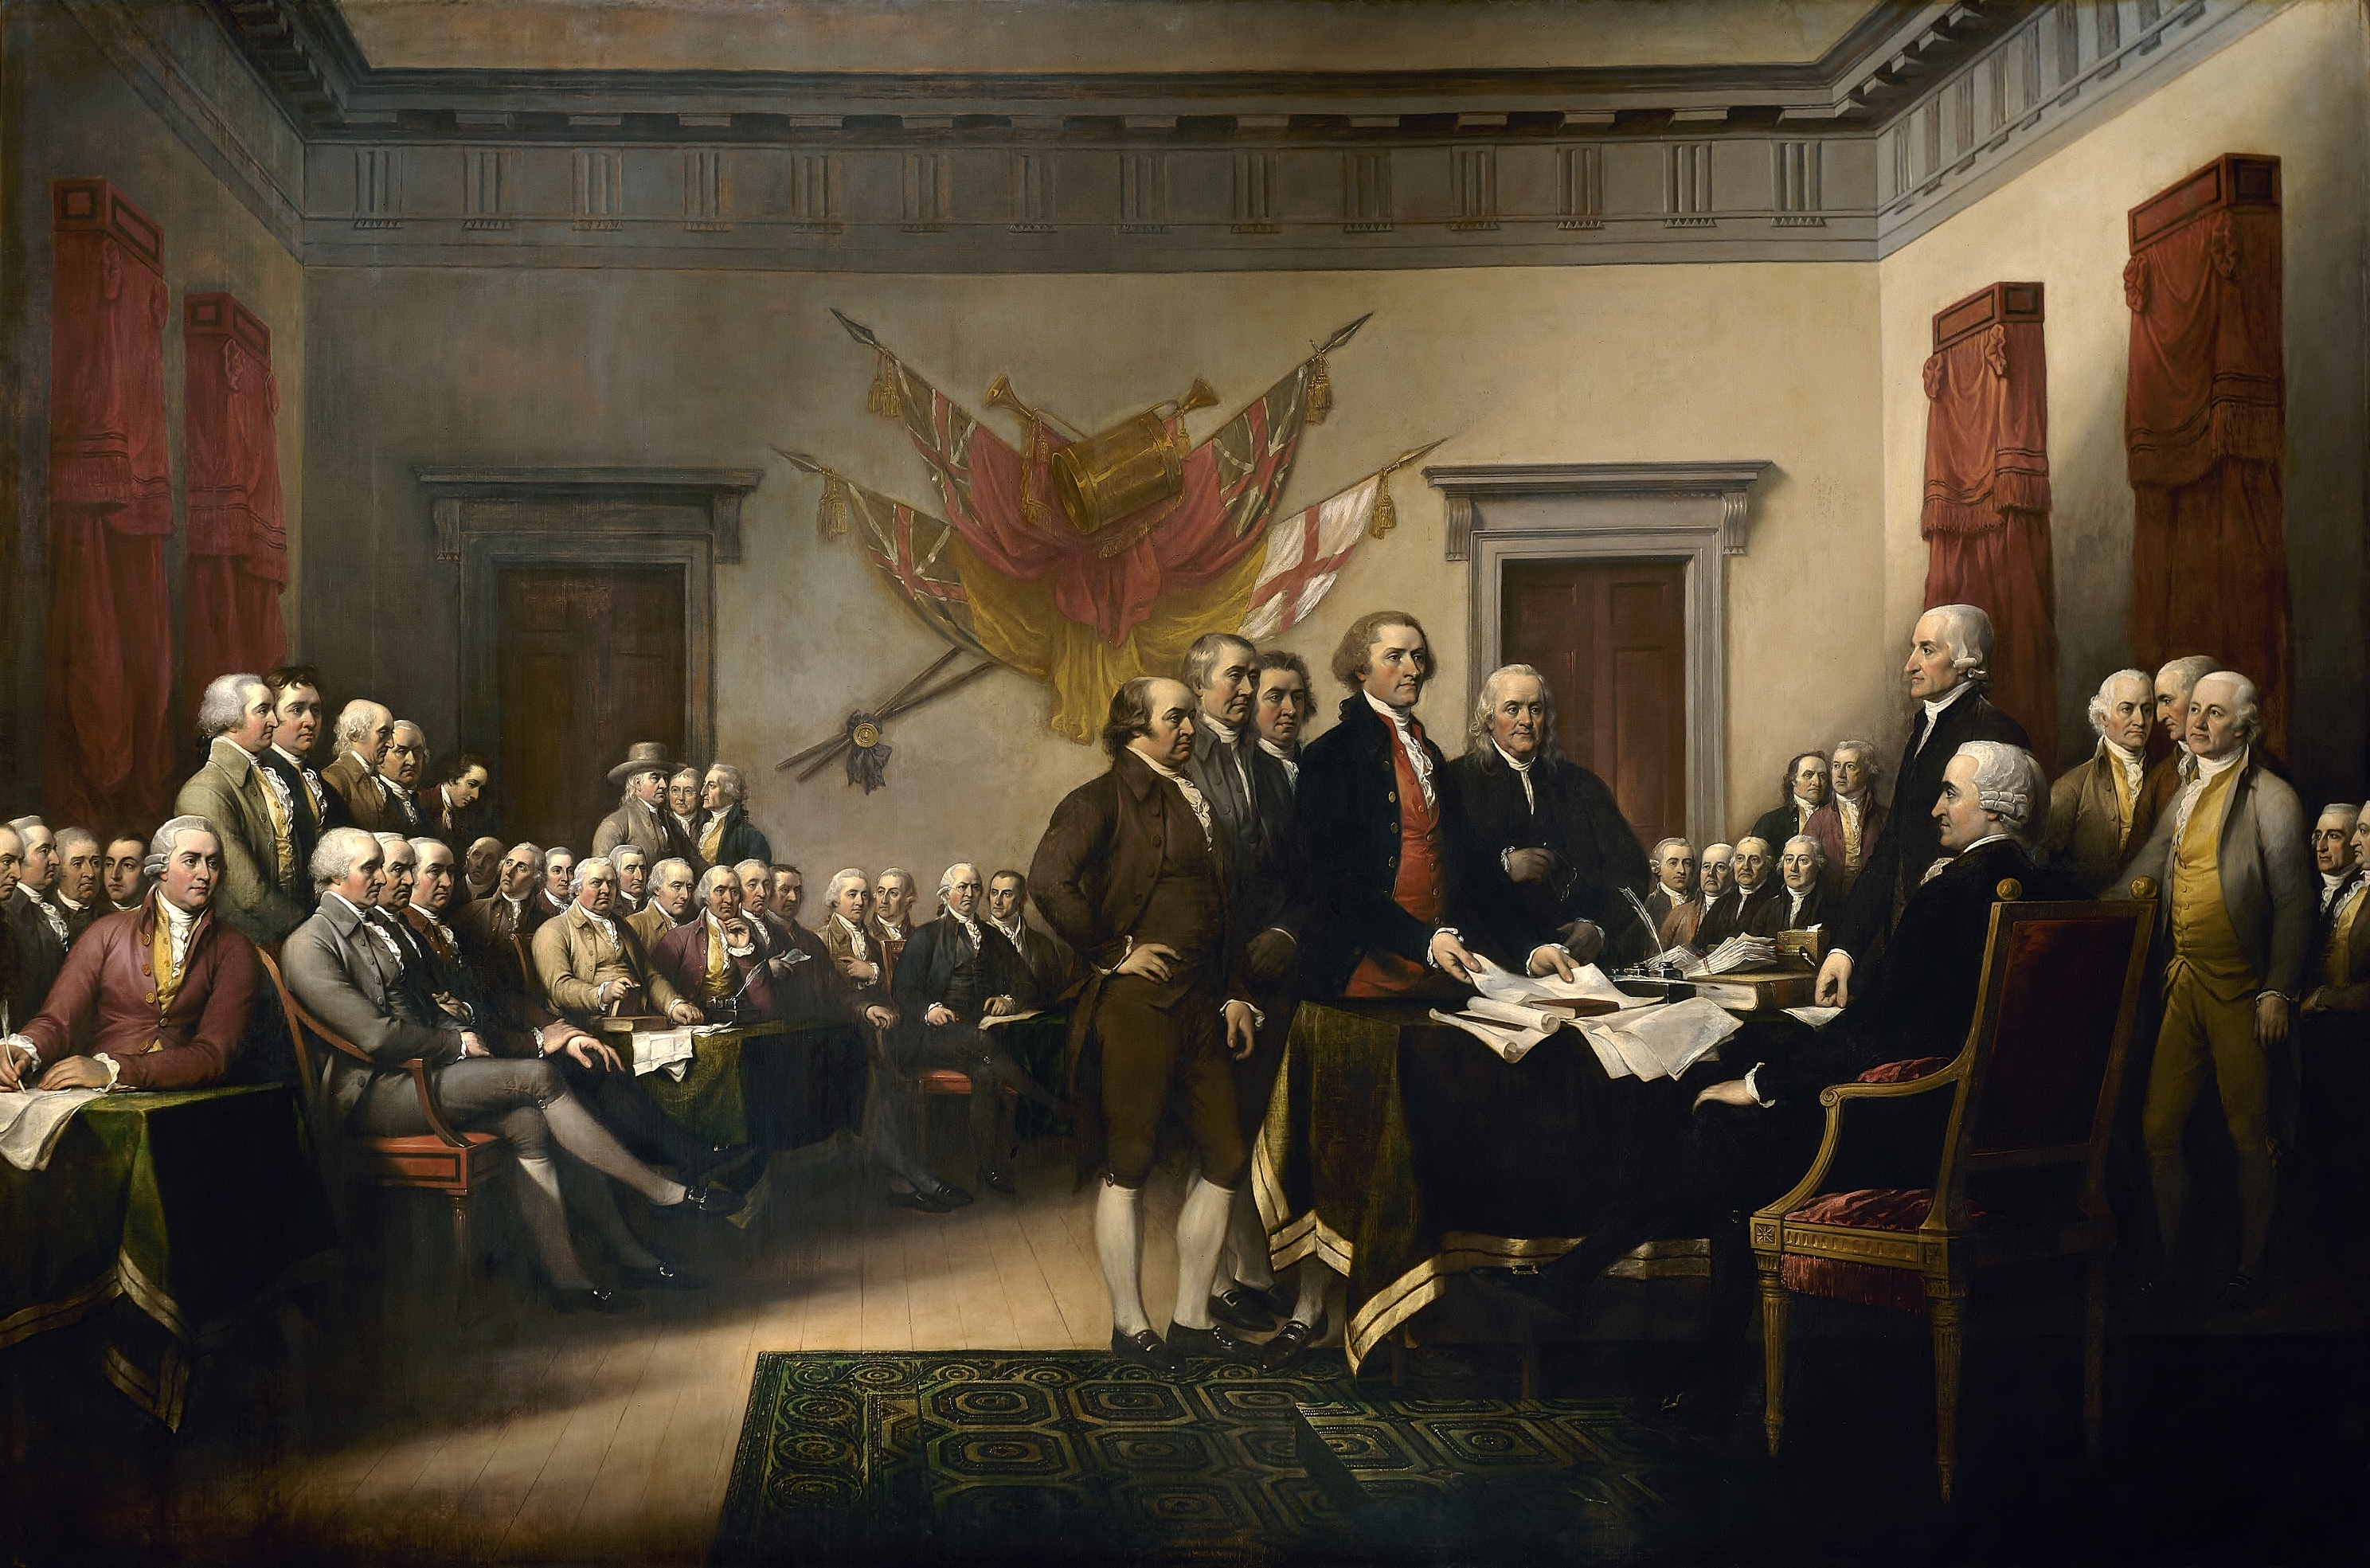 Declaration of Independence (Trumbull) - Wikipedia